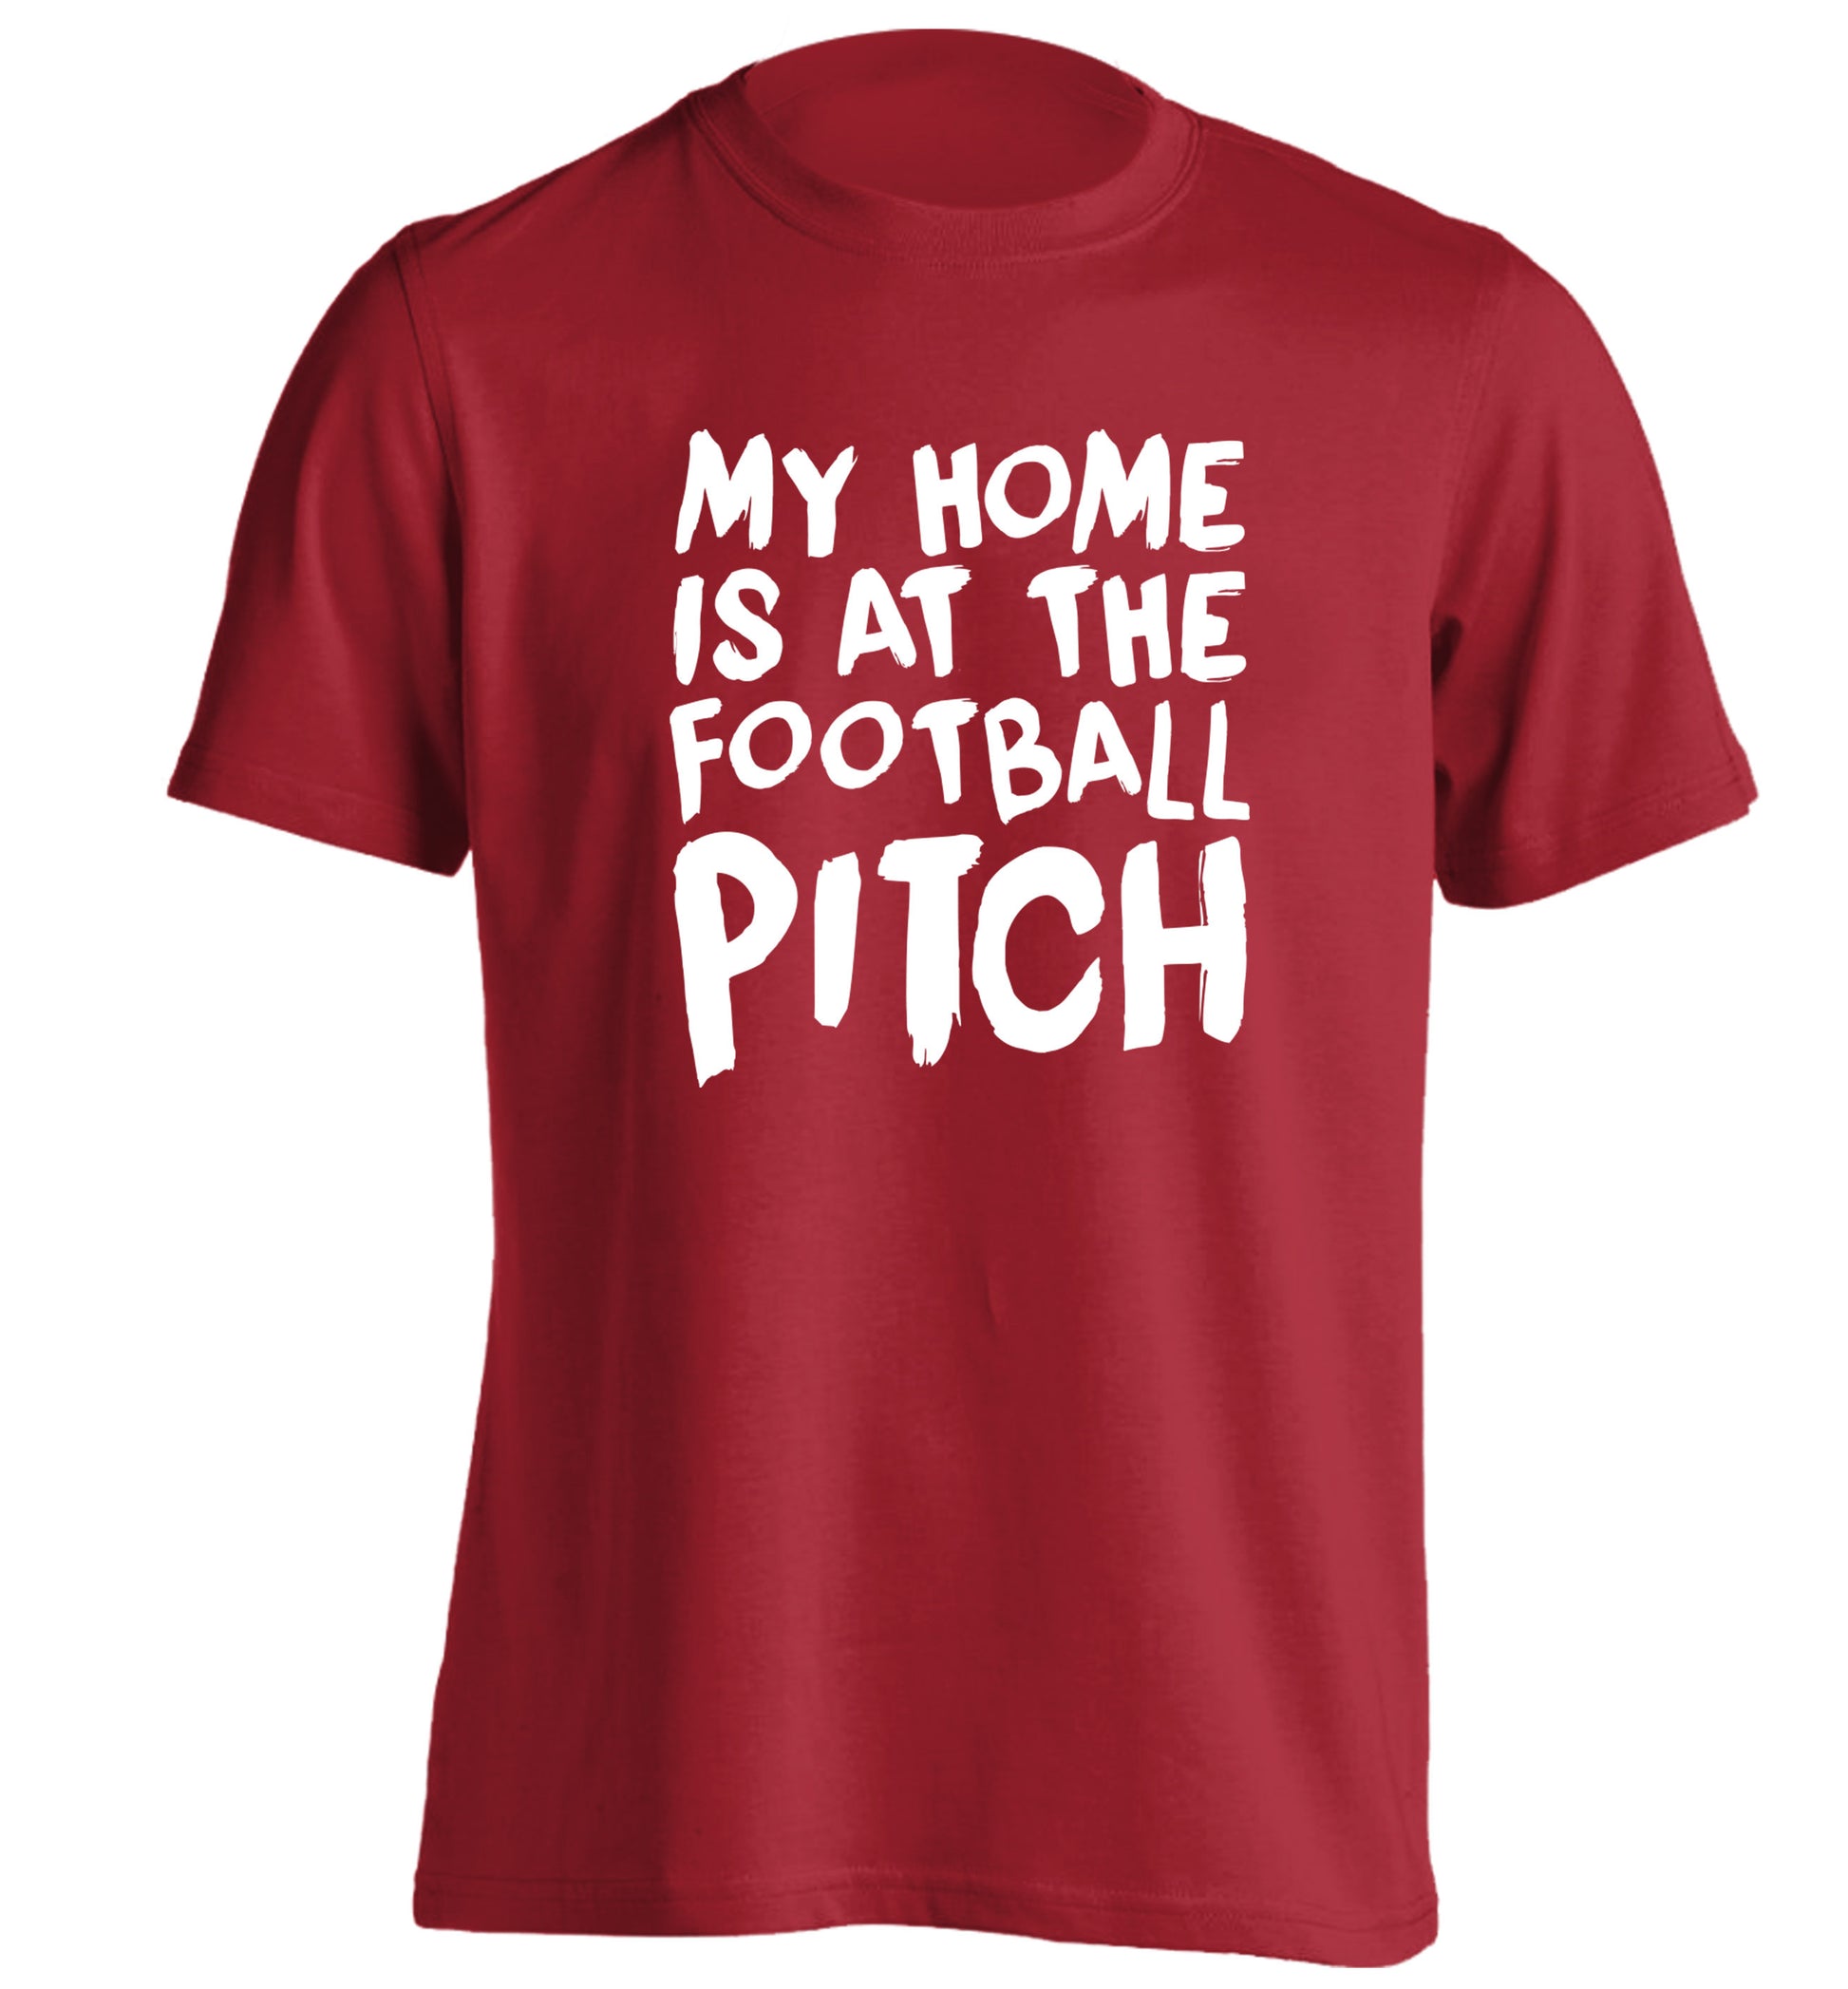 My home is at the football pitch adults unisex red Tshirt 2XL